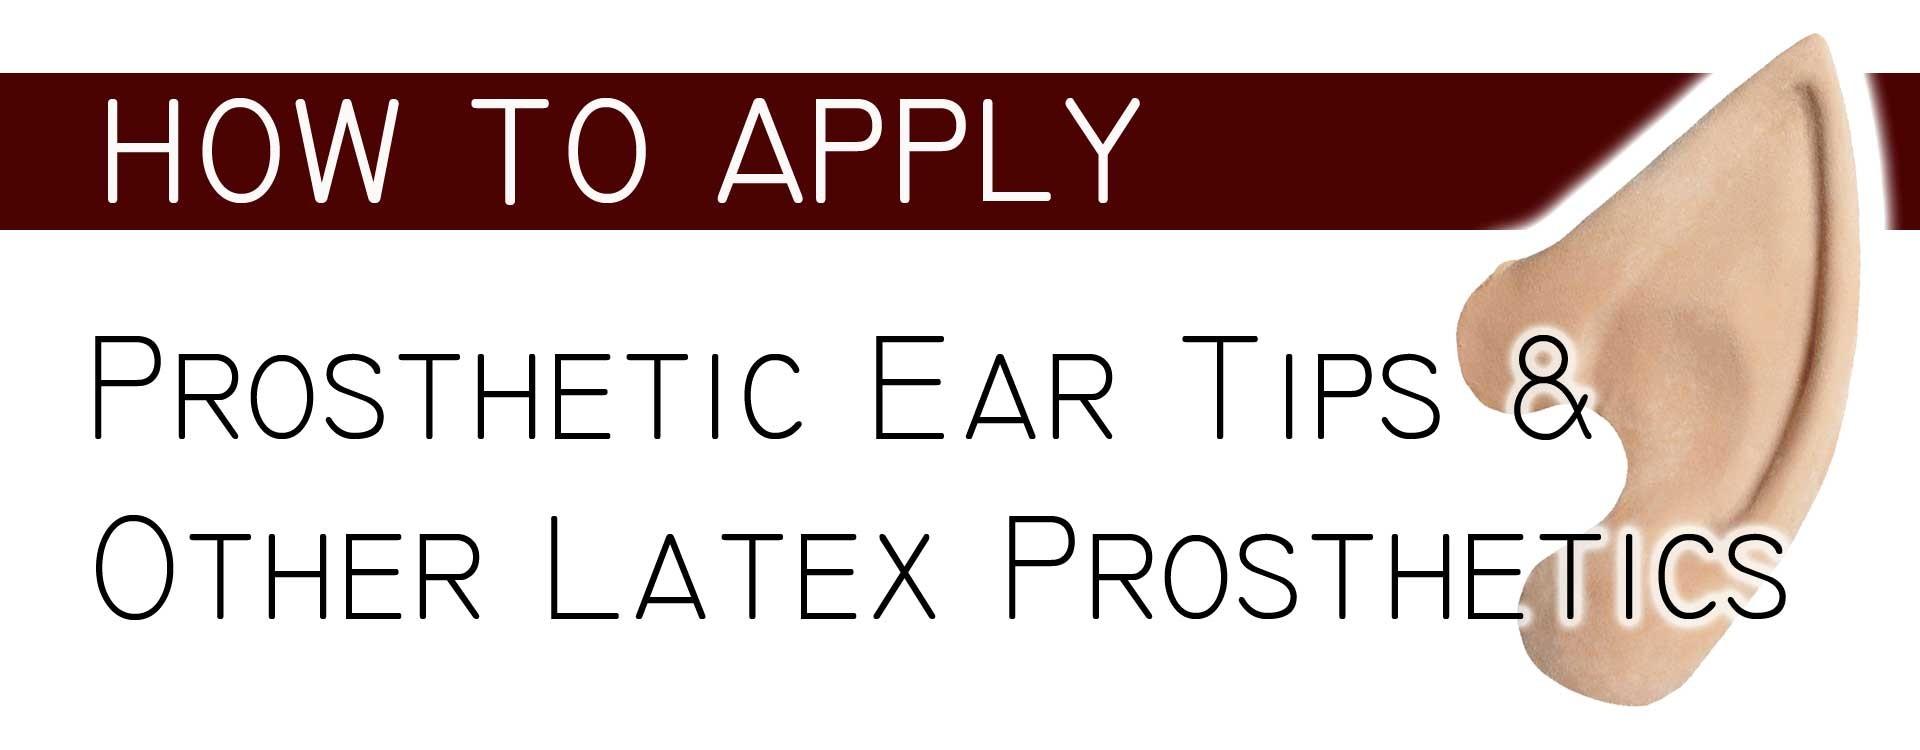 How to Apply Prosthetic Ear Tips & Other Latex Prosthetics